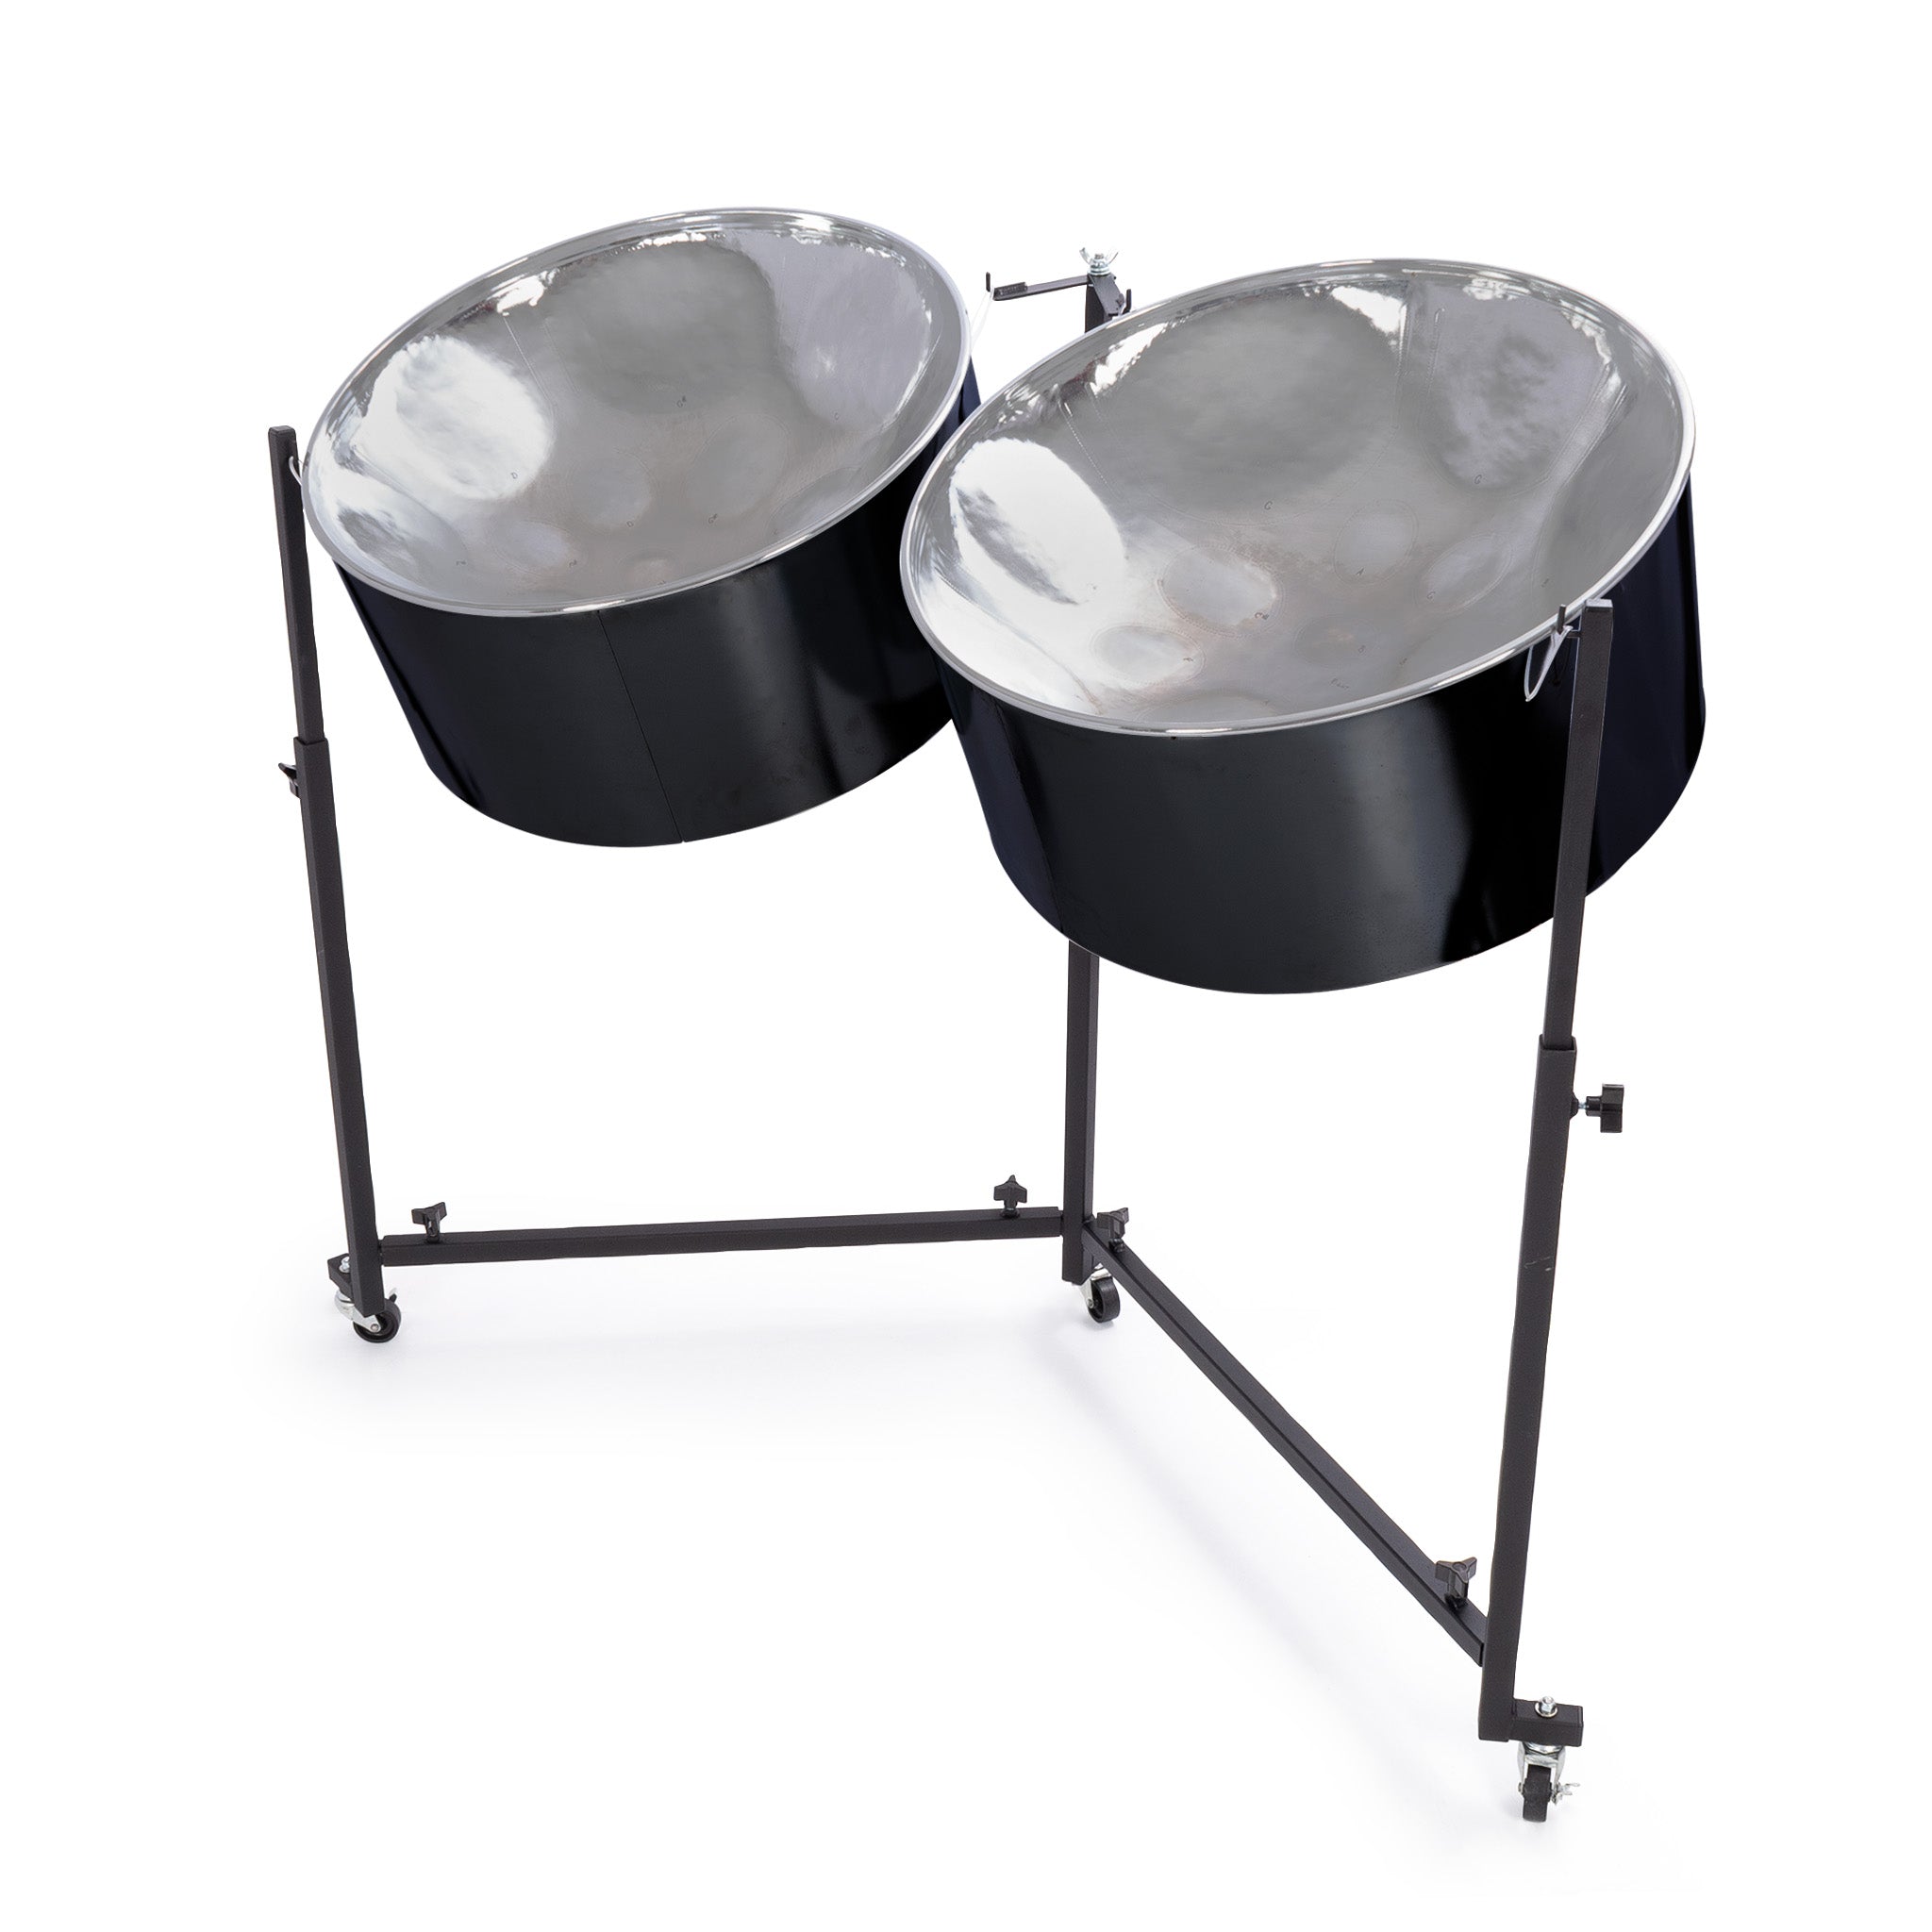 Percussion Plus Hammer Series Double Second Steel Pans - Chamberlain Music